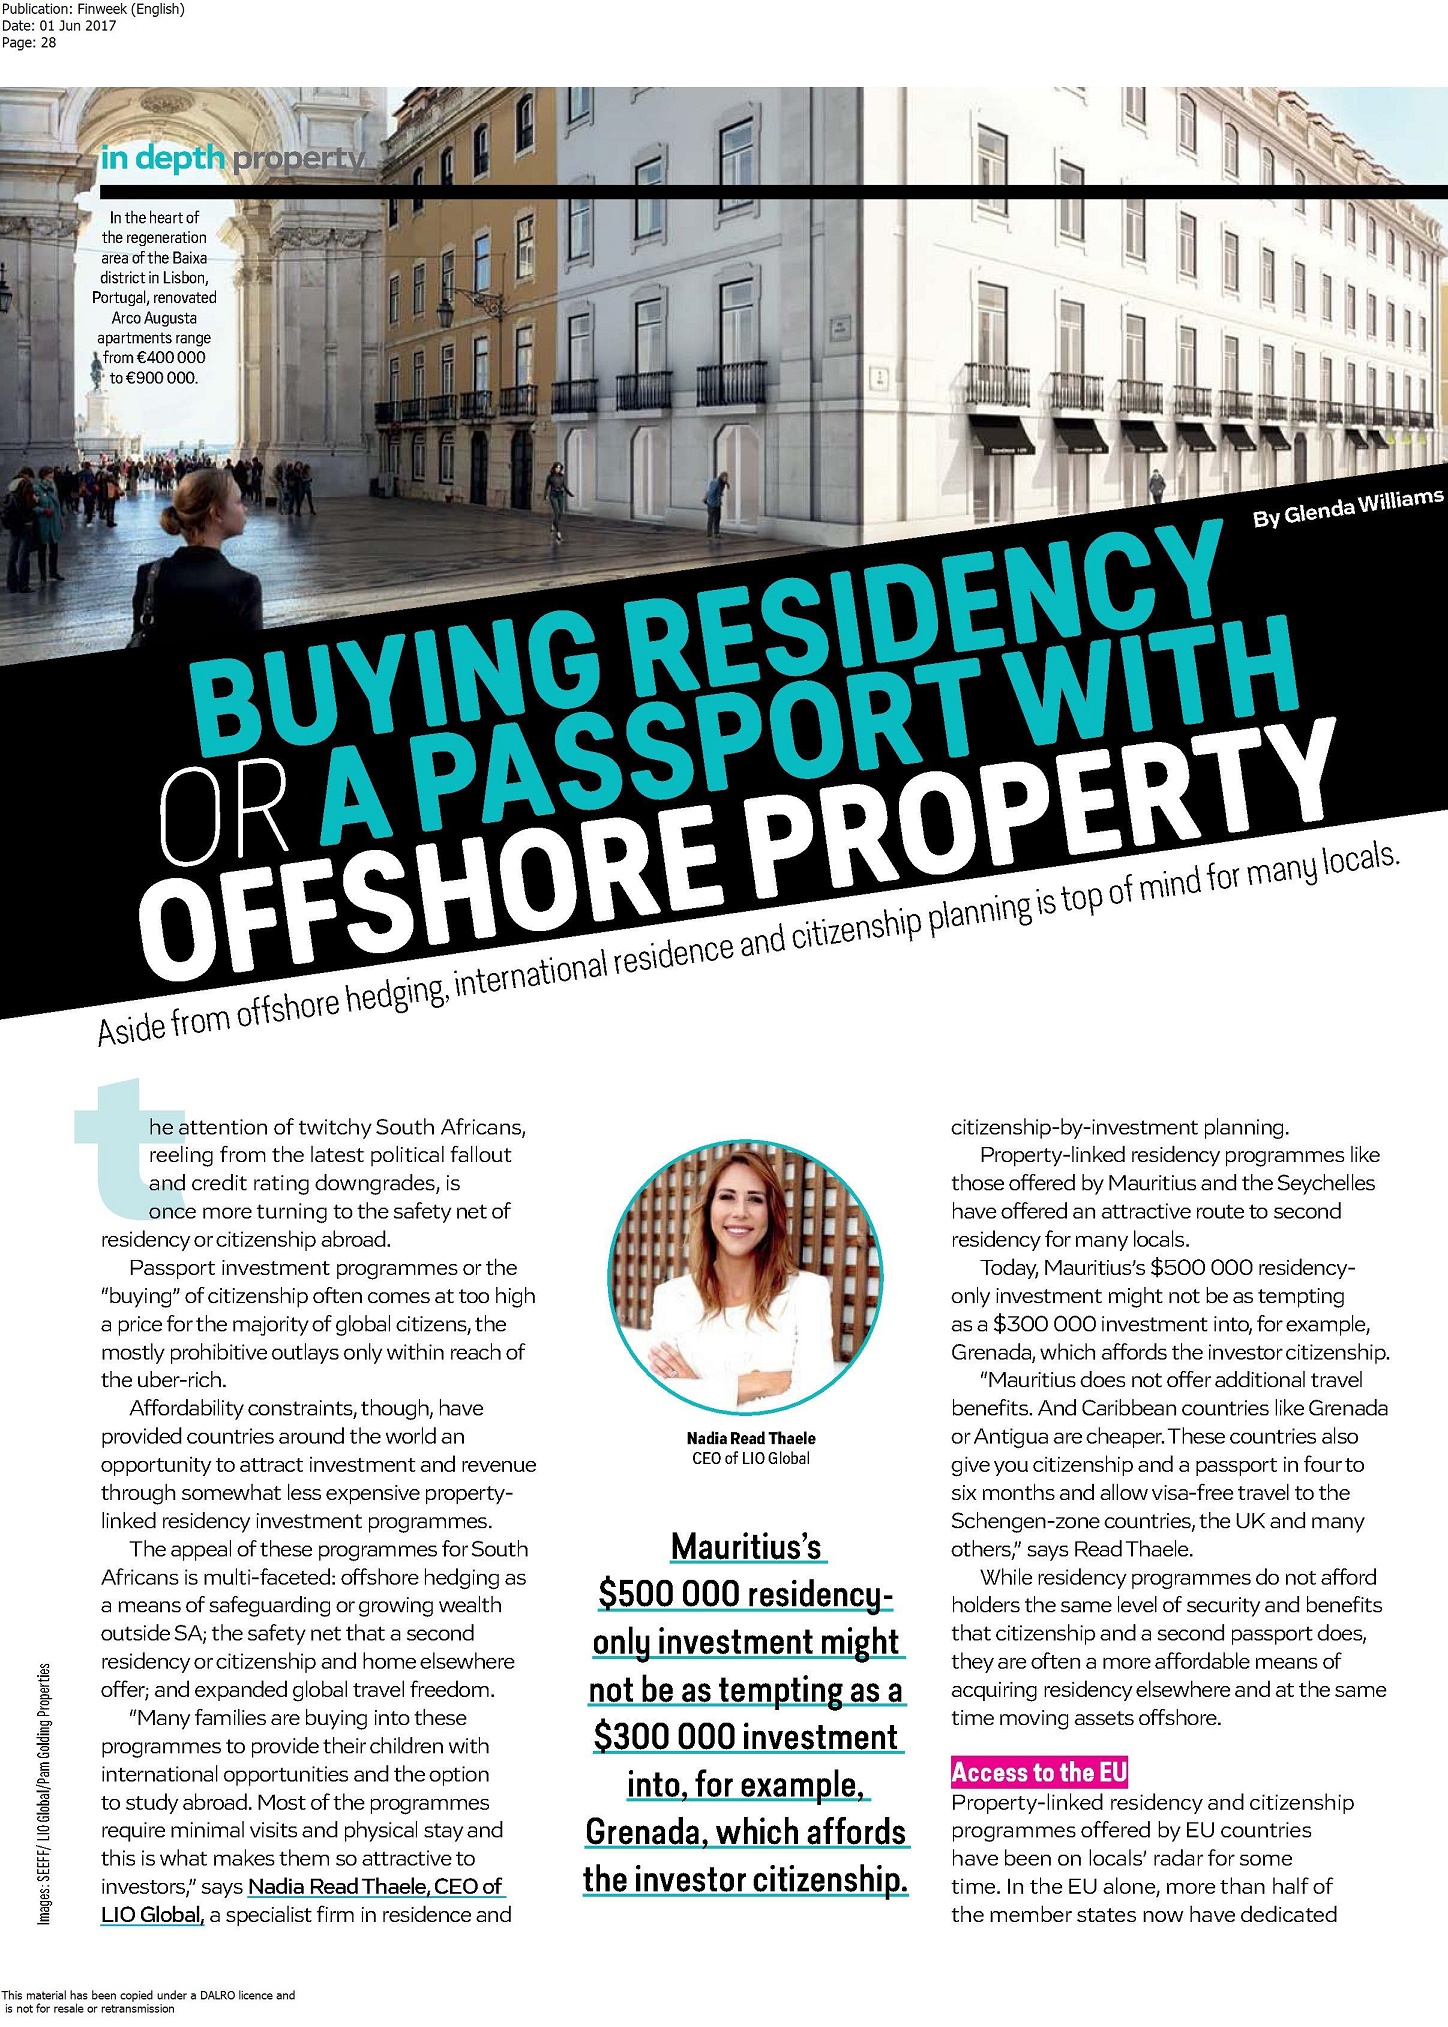 Finweek English LIO Global - pg 1 of 3 - Offshore property and visas incl. Malta - May 2017 (1).jpg